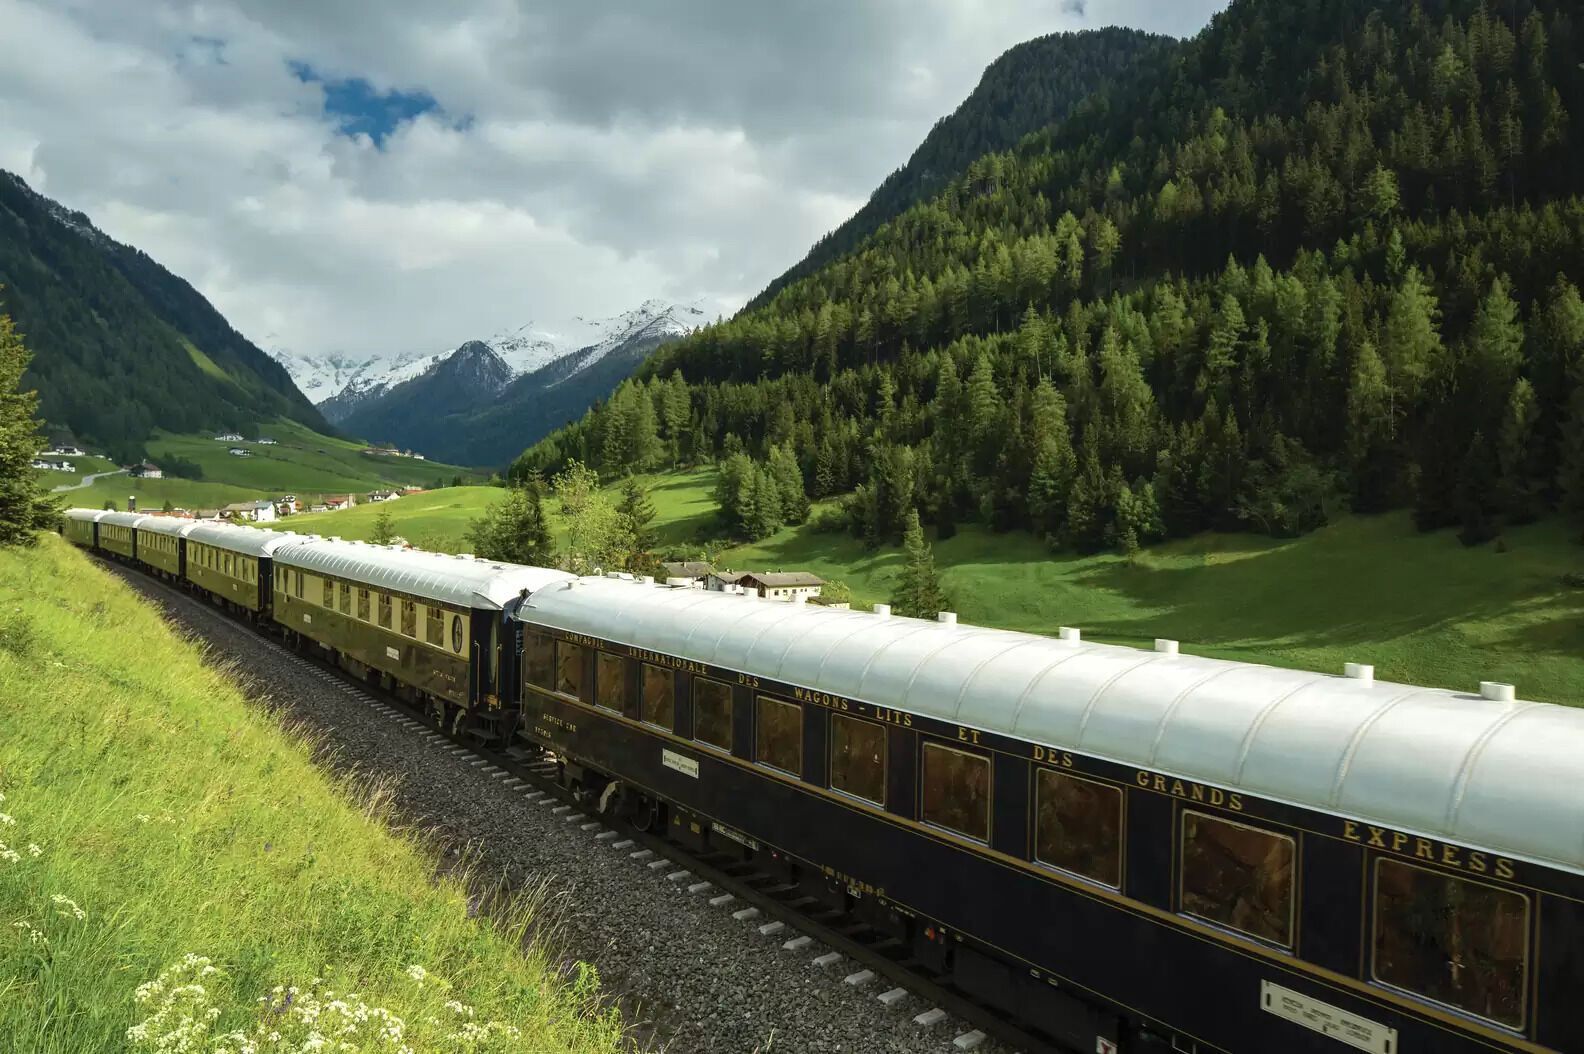 Luxurious train journeys: two tourist companies compete to revive the historic Eastern Express